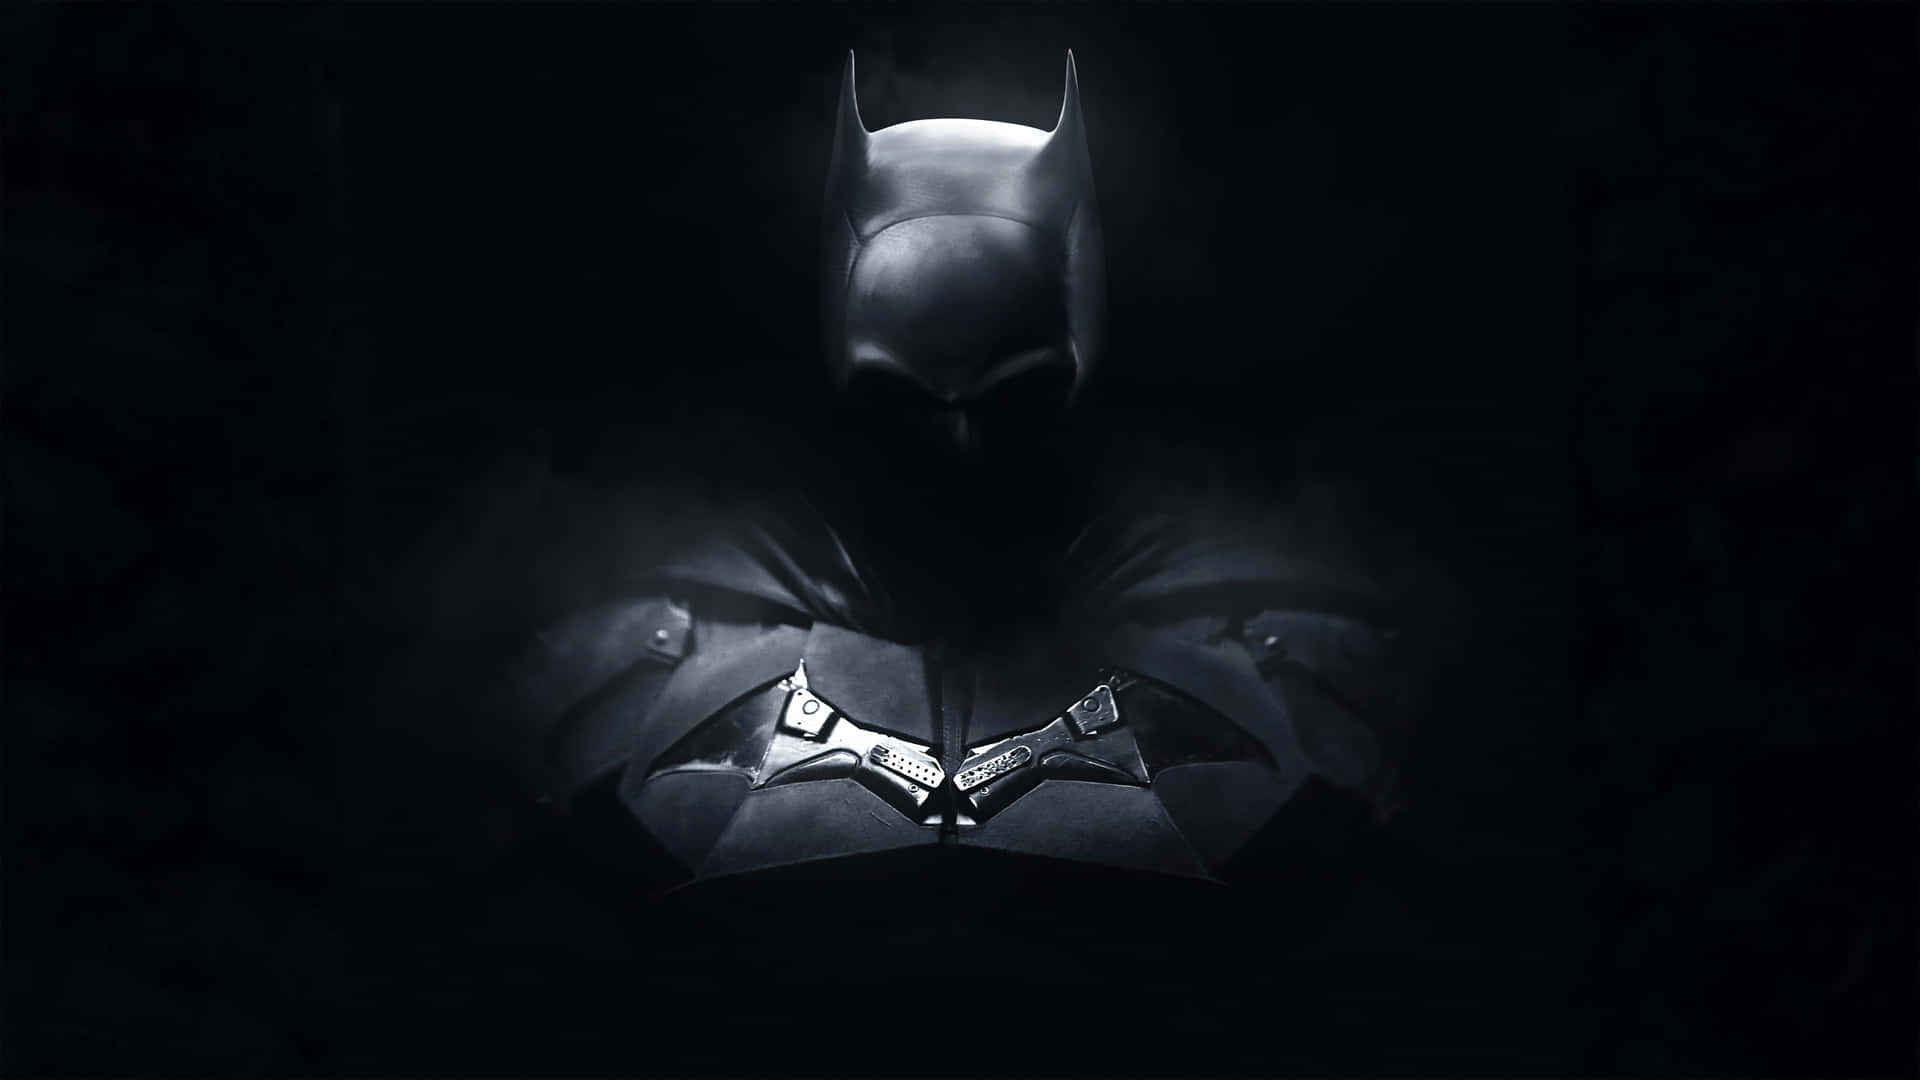 The Dark Knight looks out over Gotham City Wallpaper